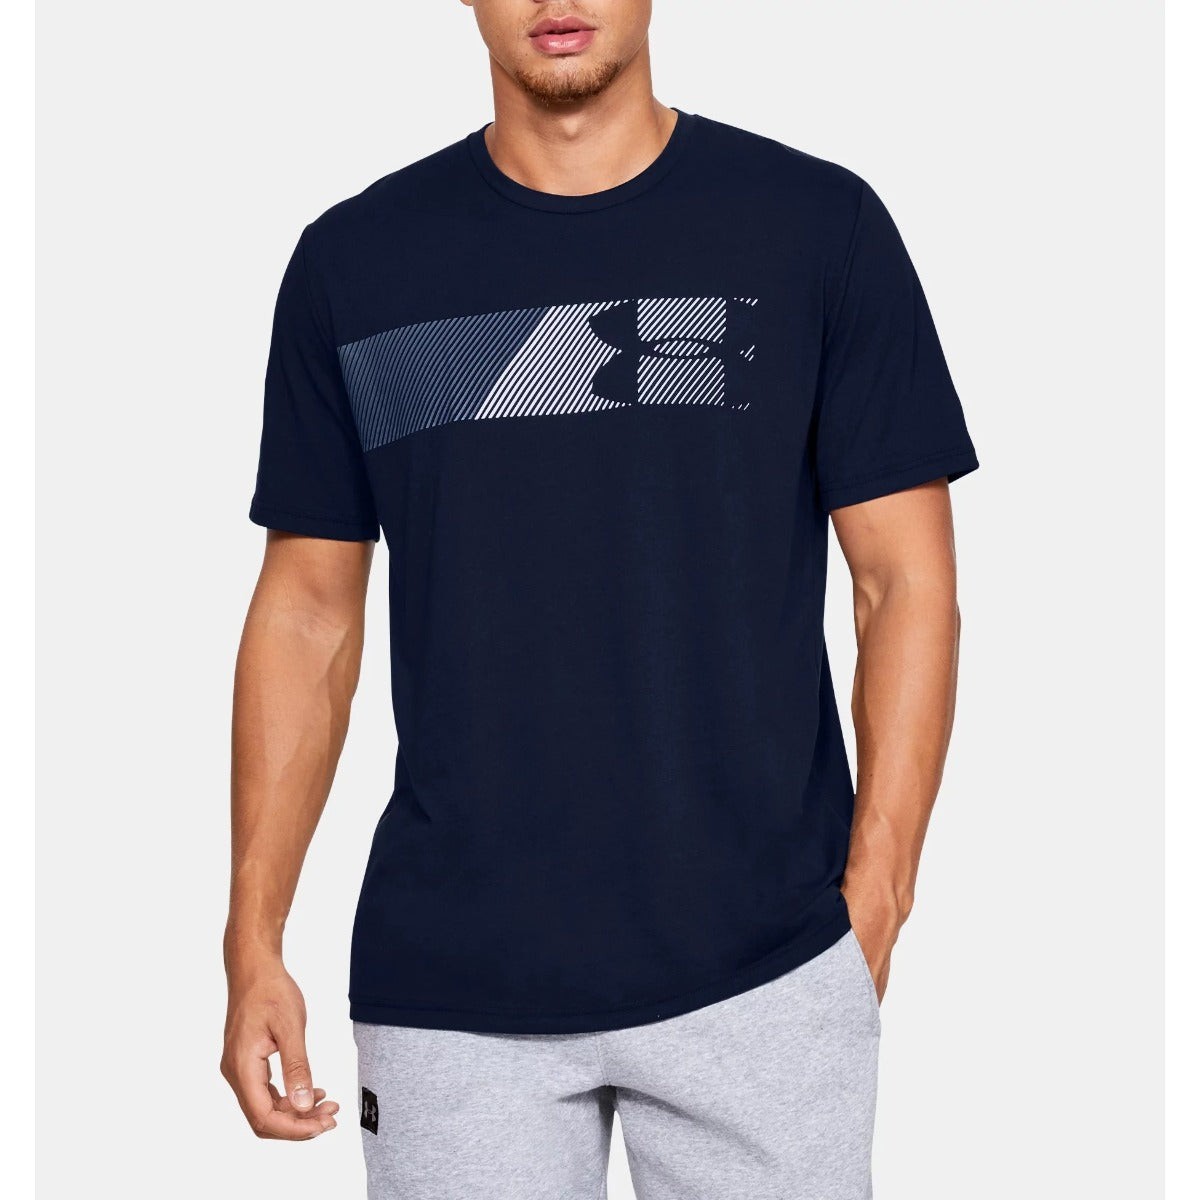 Under Armour Fast Left Chest 2.0 Tee Mens (Navy 408)